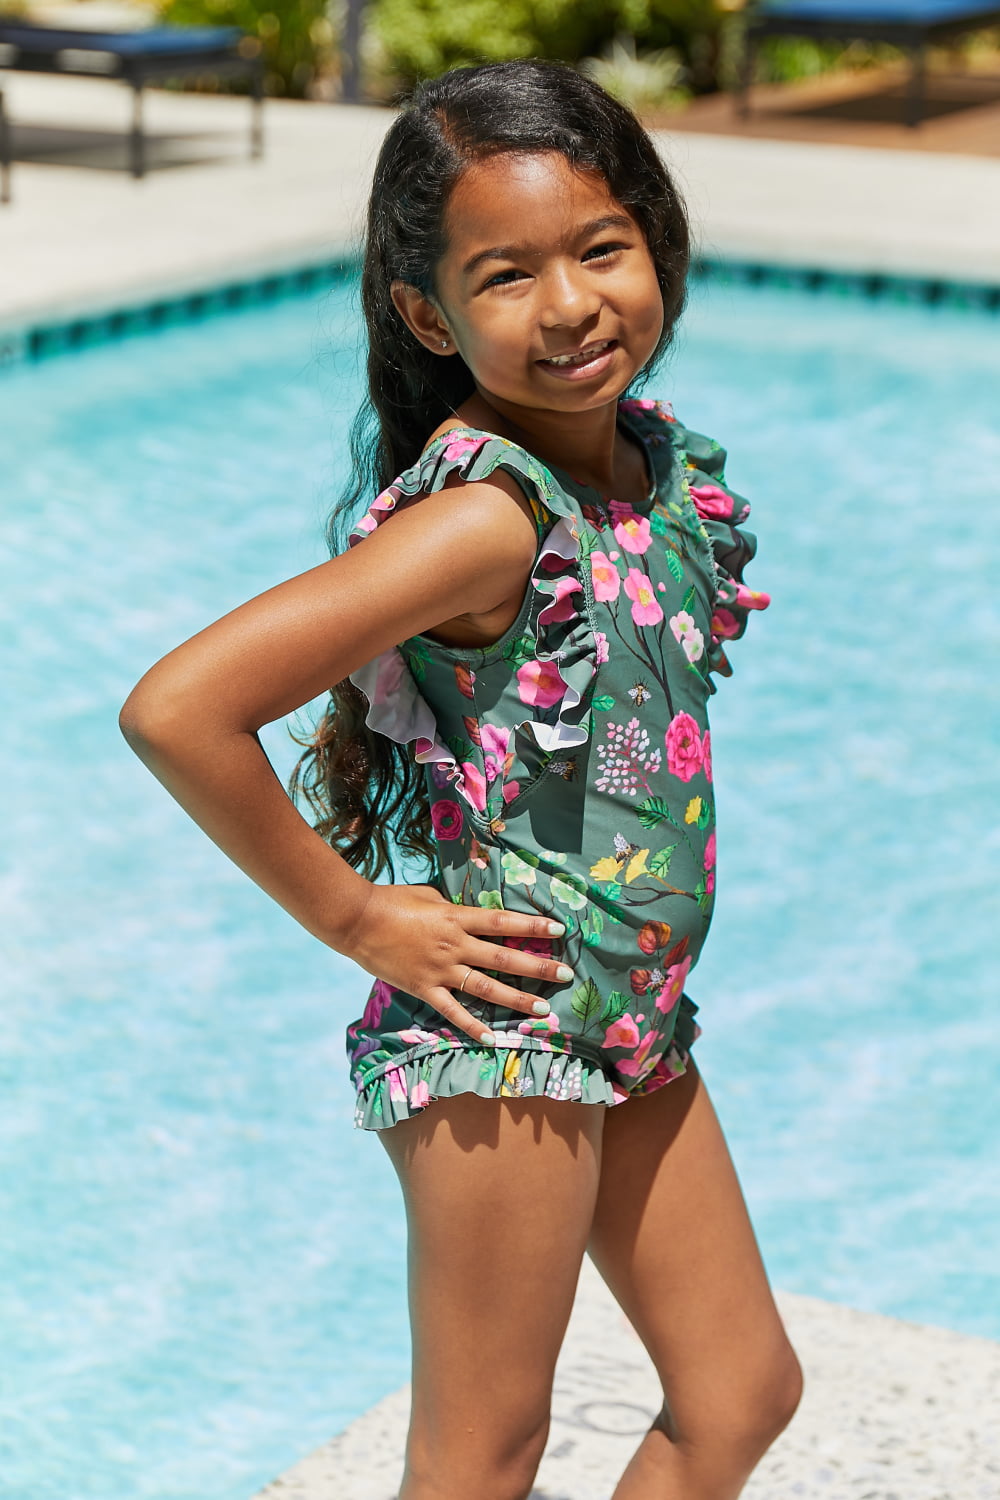 Bring Me Flowers V-Neck One Piece Swimsuit*little girls*-SHIPS DIRECTLY TO YOU!